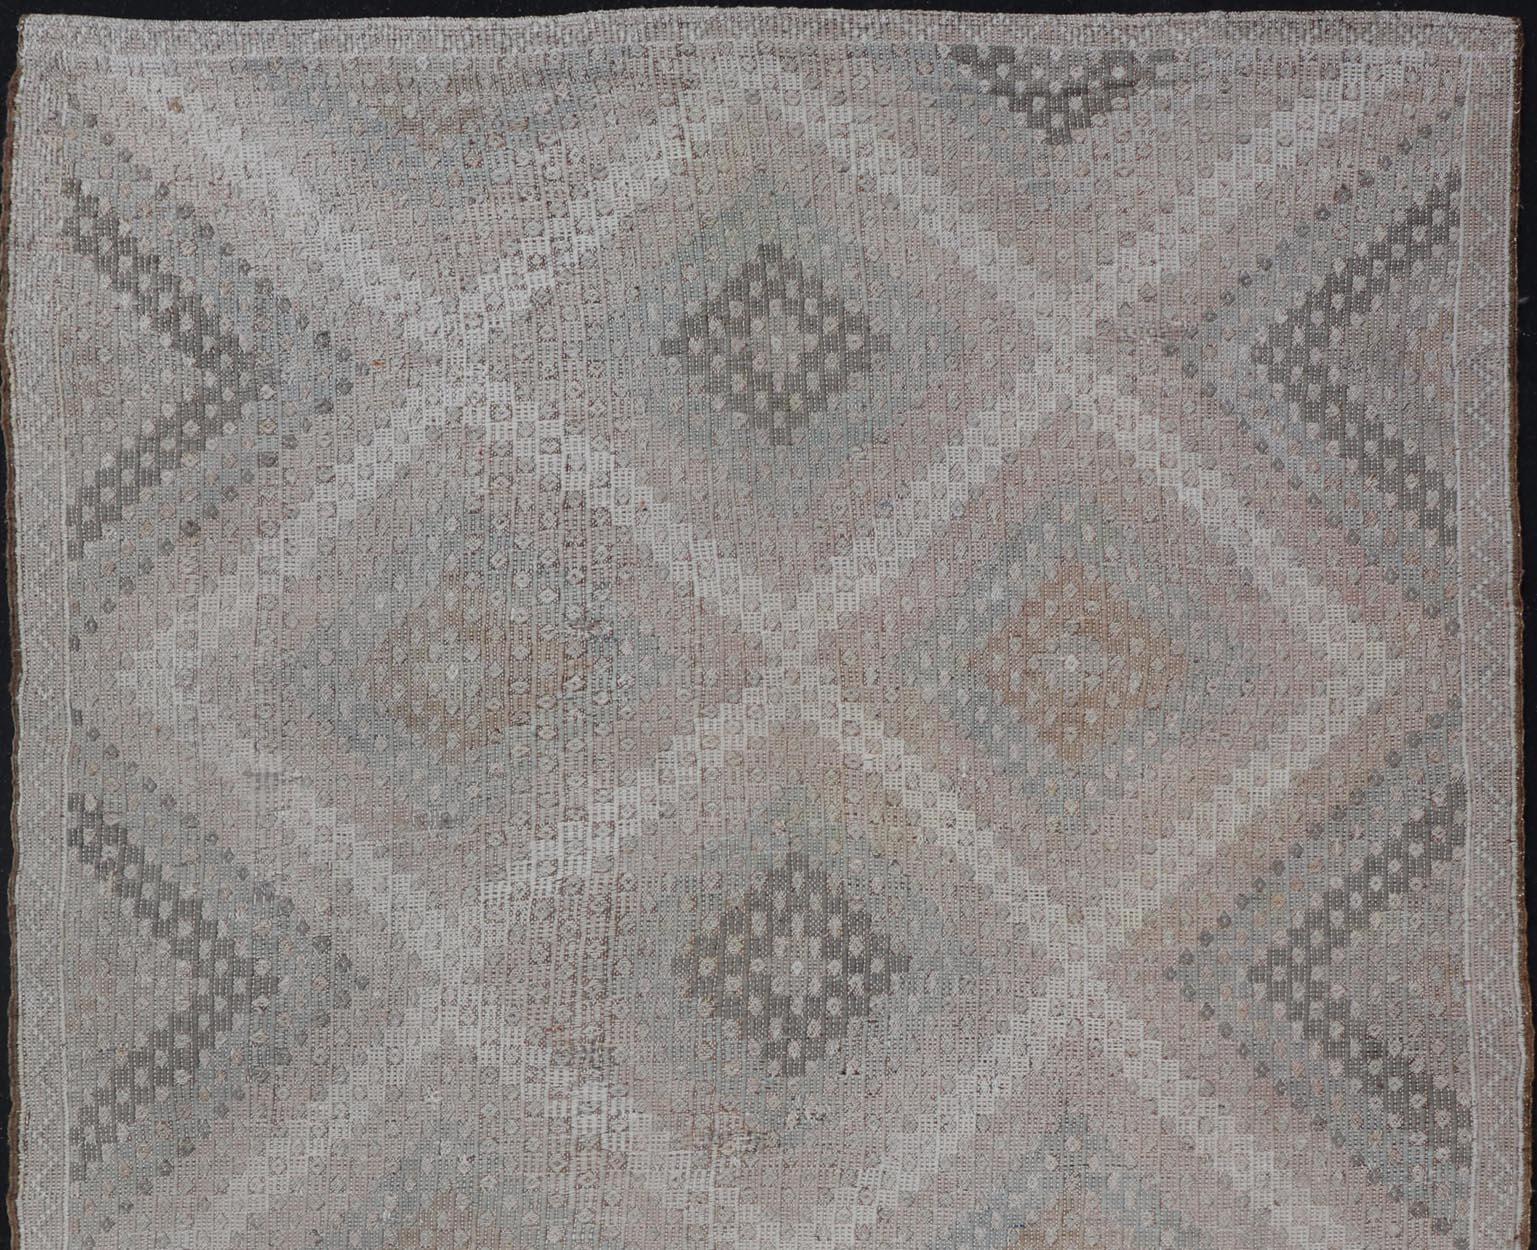 Embroidered vintage flat weave rug from Turkey in shades of tan, taupe, gray cream and neutrals with geometric pattern, Keivan Woven Arts / rug EN-13653, country of origin / type: Turkey / Kilim, circa 1950.

Measures: 6'0 x 9'6.